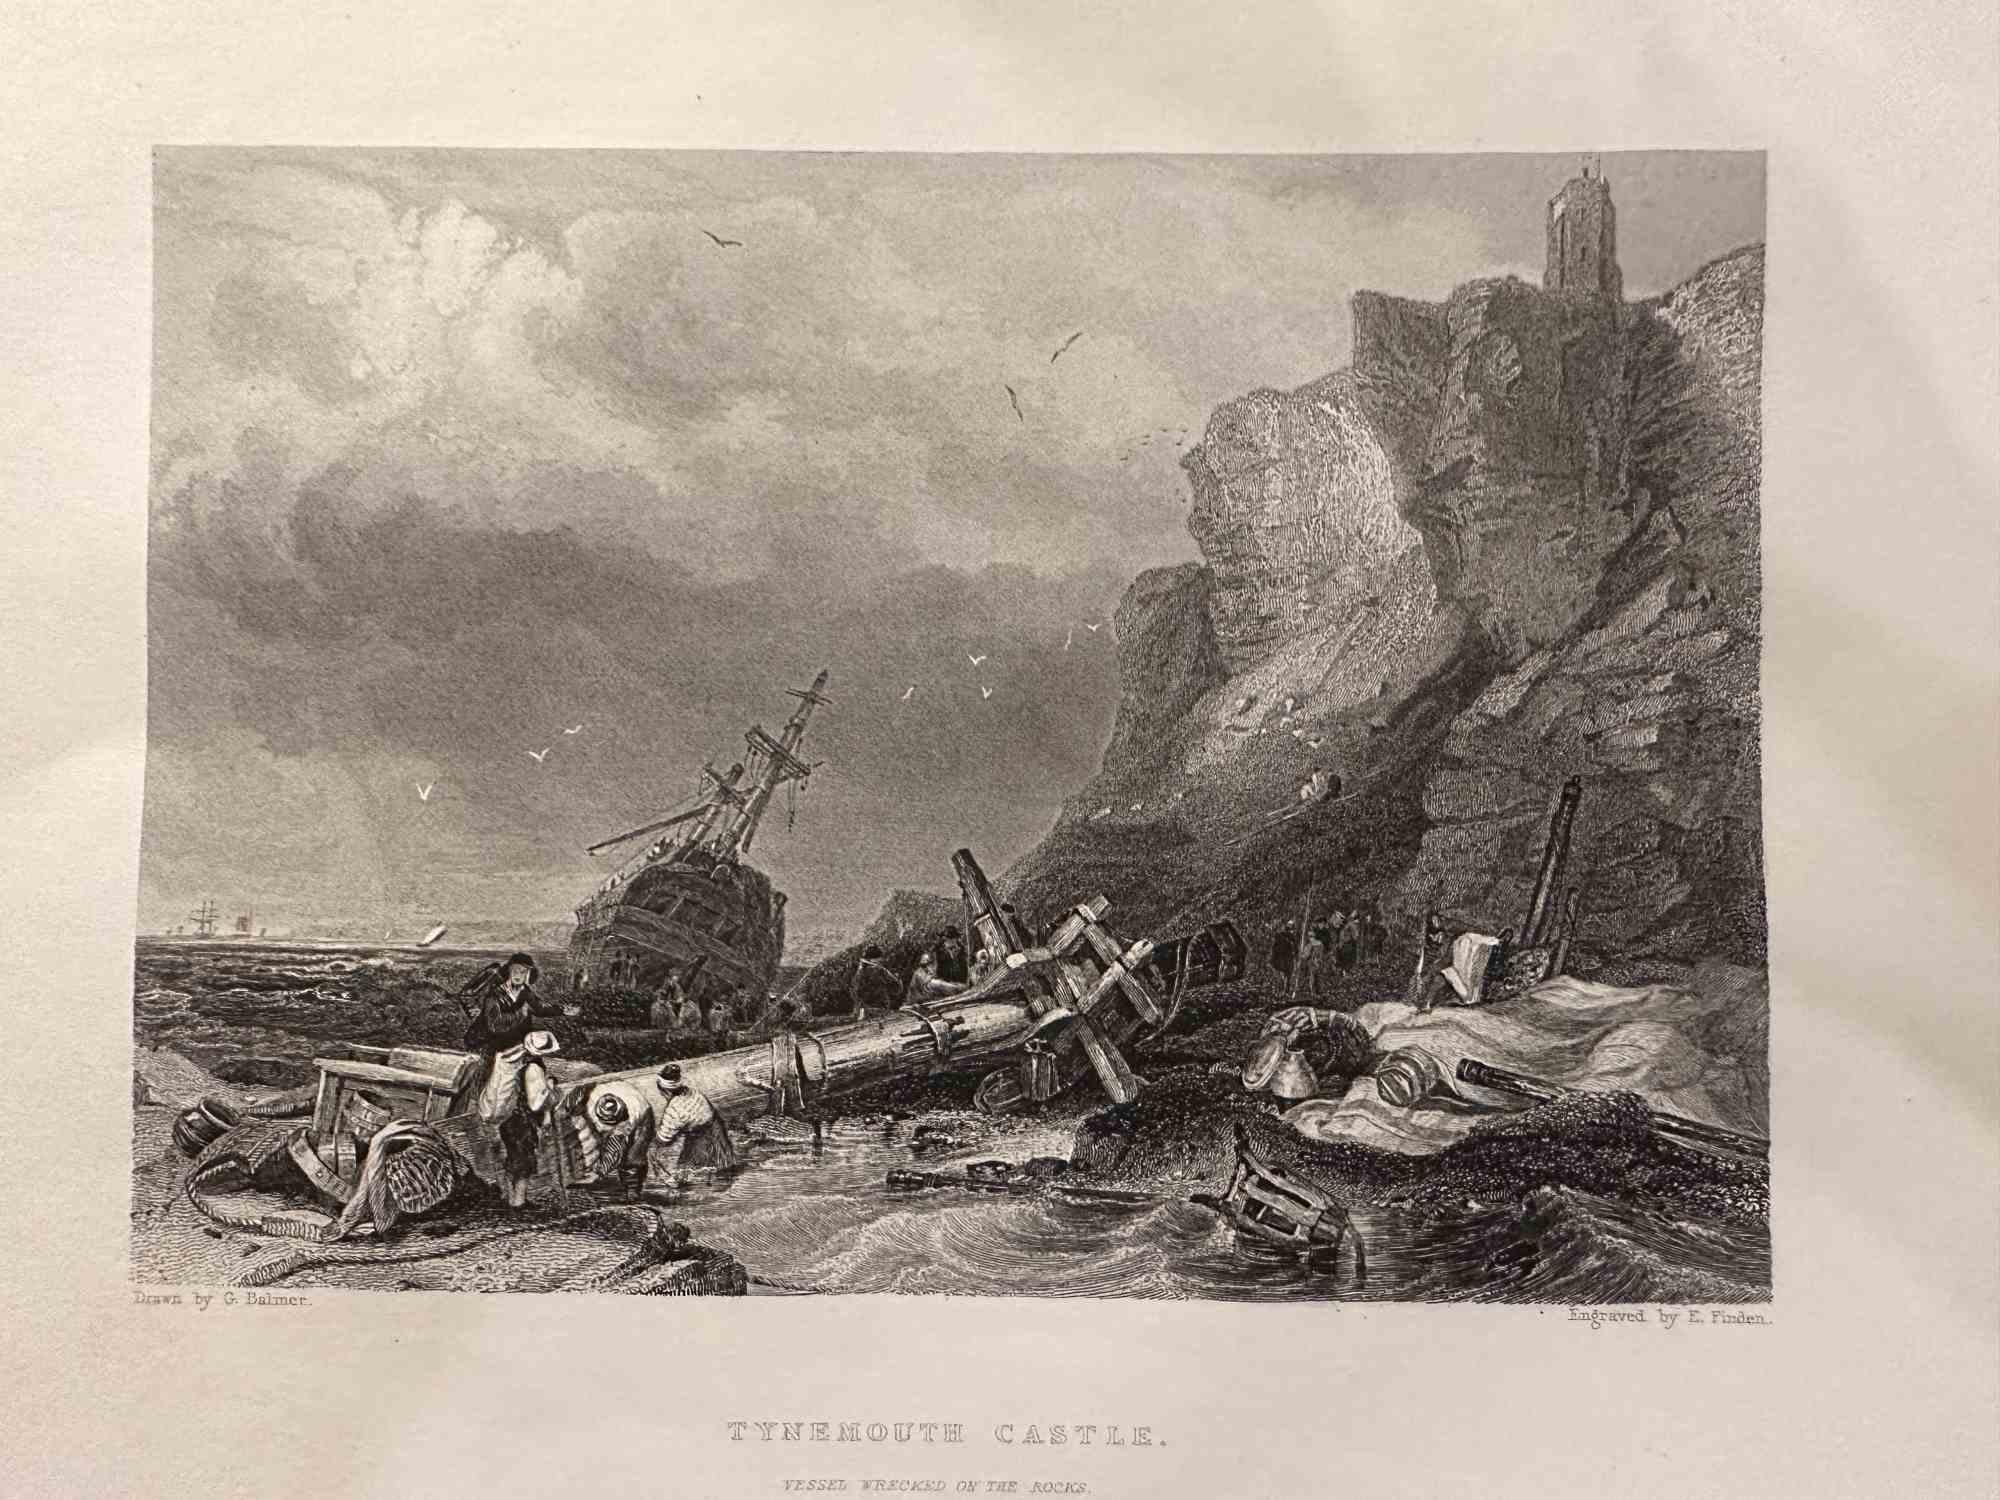 Tynemouth Castel is an etching realized in 1845 by Edward Francis Finden.

Signed on the plate. 

Titled on the lower center, from the series of "Ports of Great Britain"

The artwork is beautifully realized in a well-balanced composition through